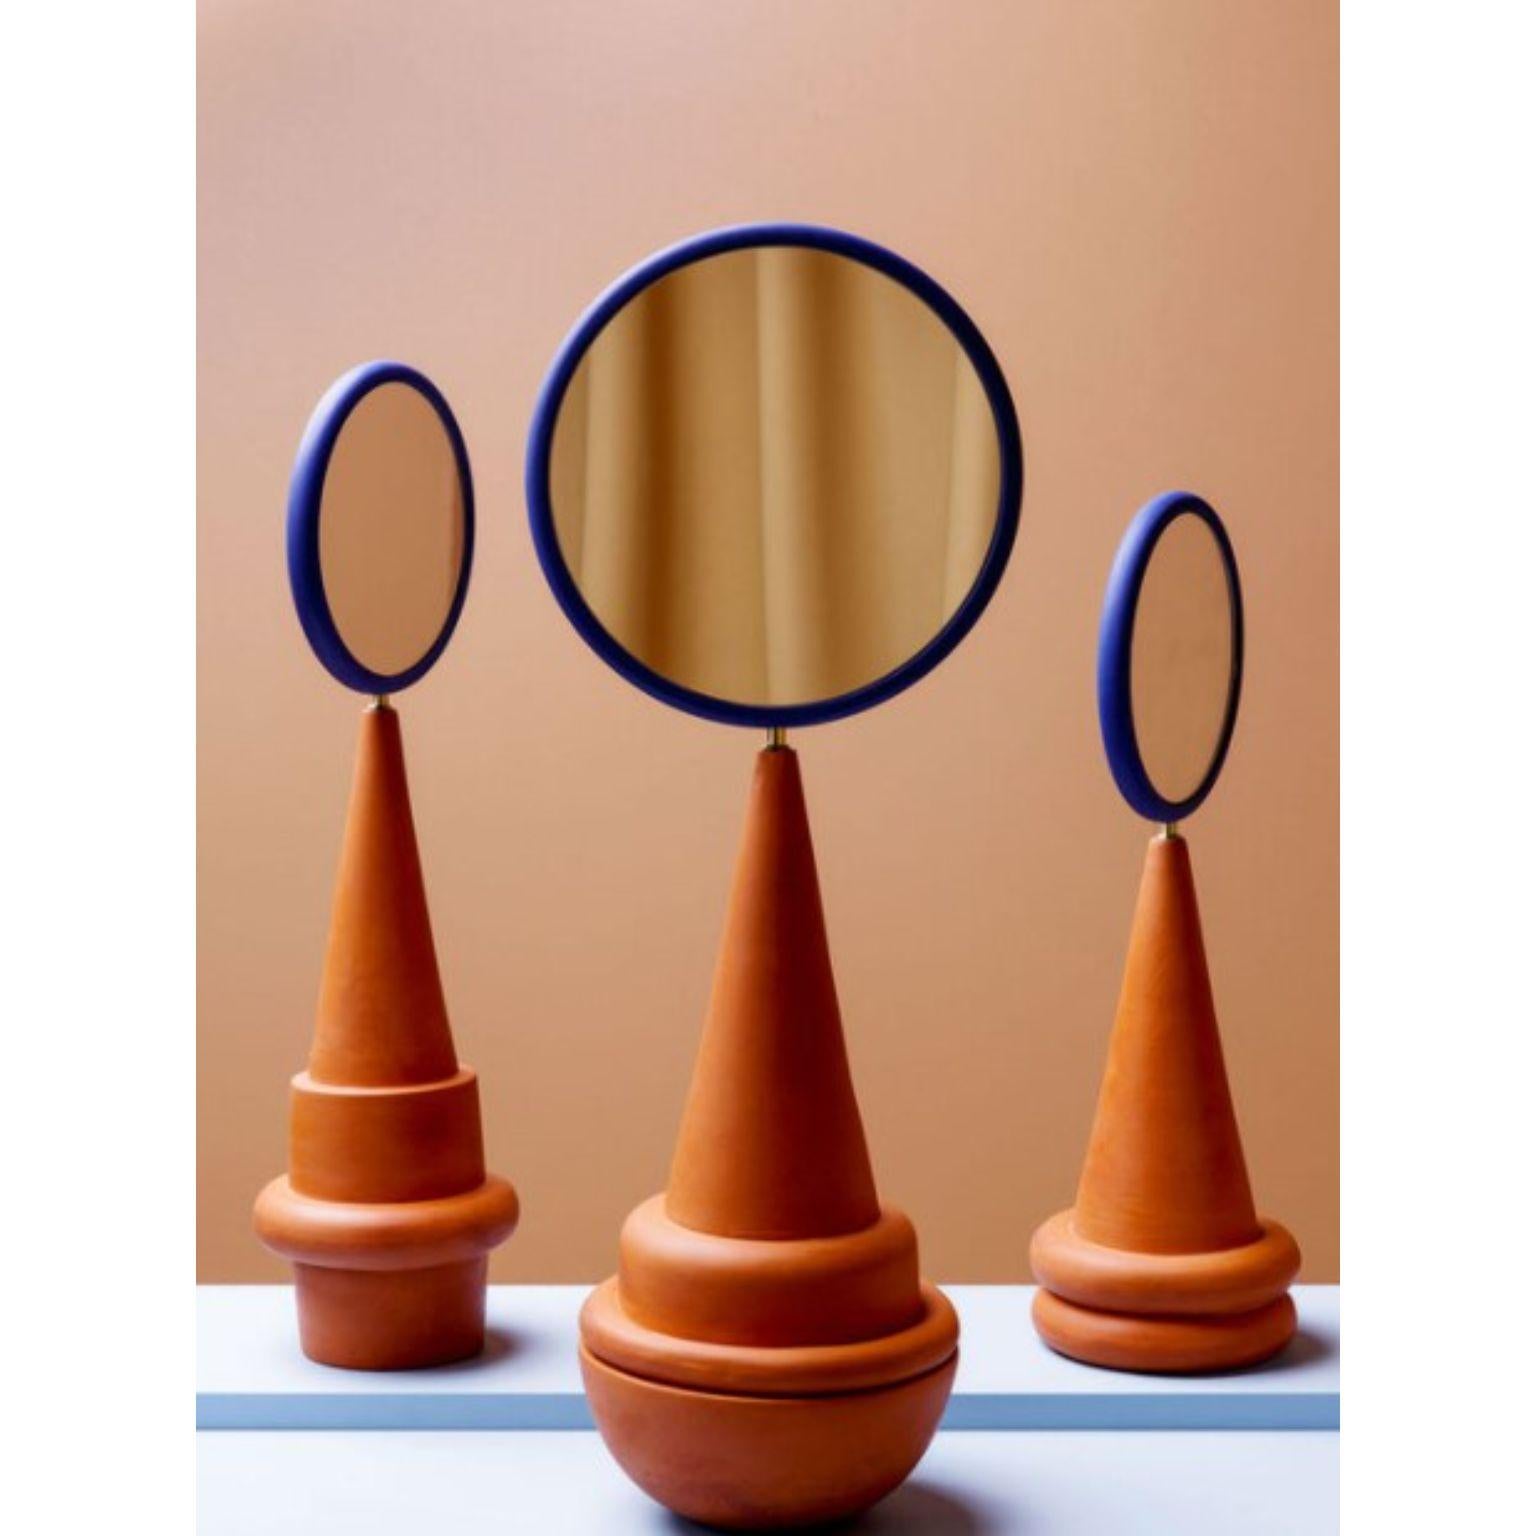 Set of 3 Marrakesh table mirrors by Tero Kuitunen. Material: slip cast terracotta, Mdf, chalk paint, mirror, brass.
Dimensions: D30 x H58 cm, D20 x 53cm , D20 x H40 cm
Edition of 8.
Also available : different colours (blue, brown) and different